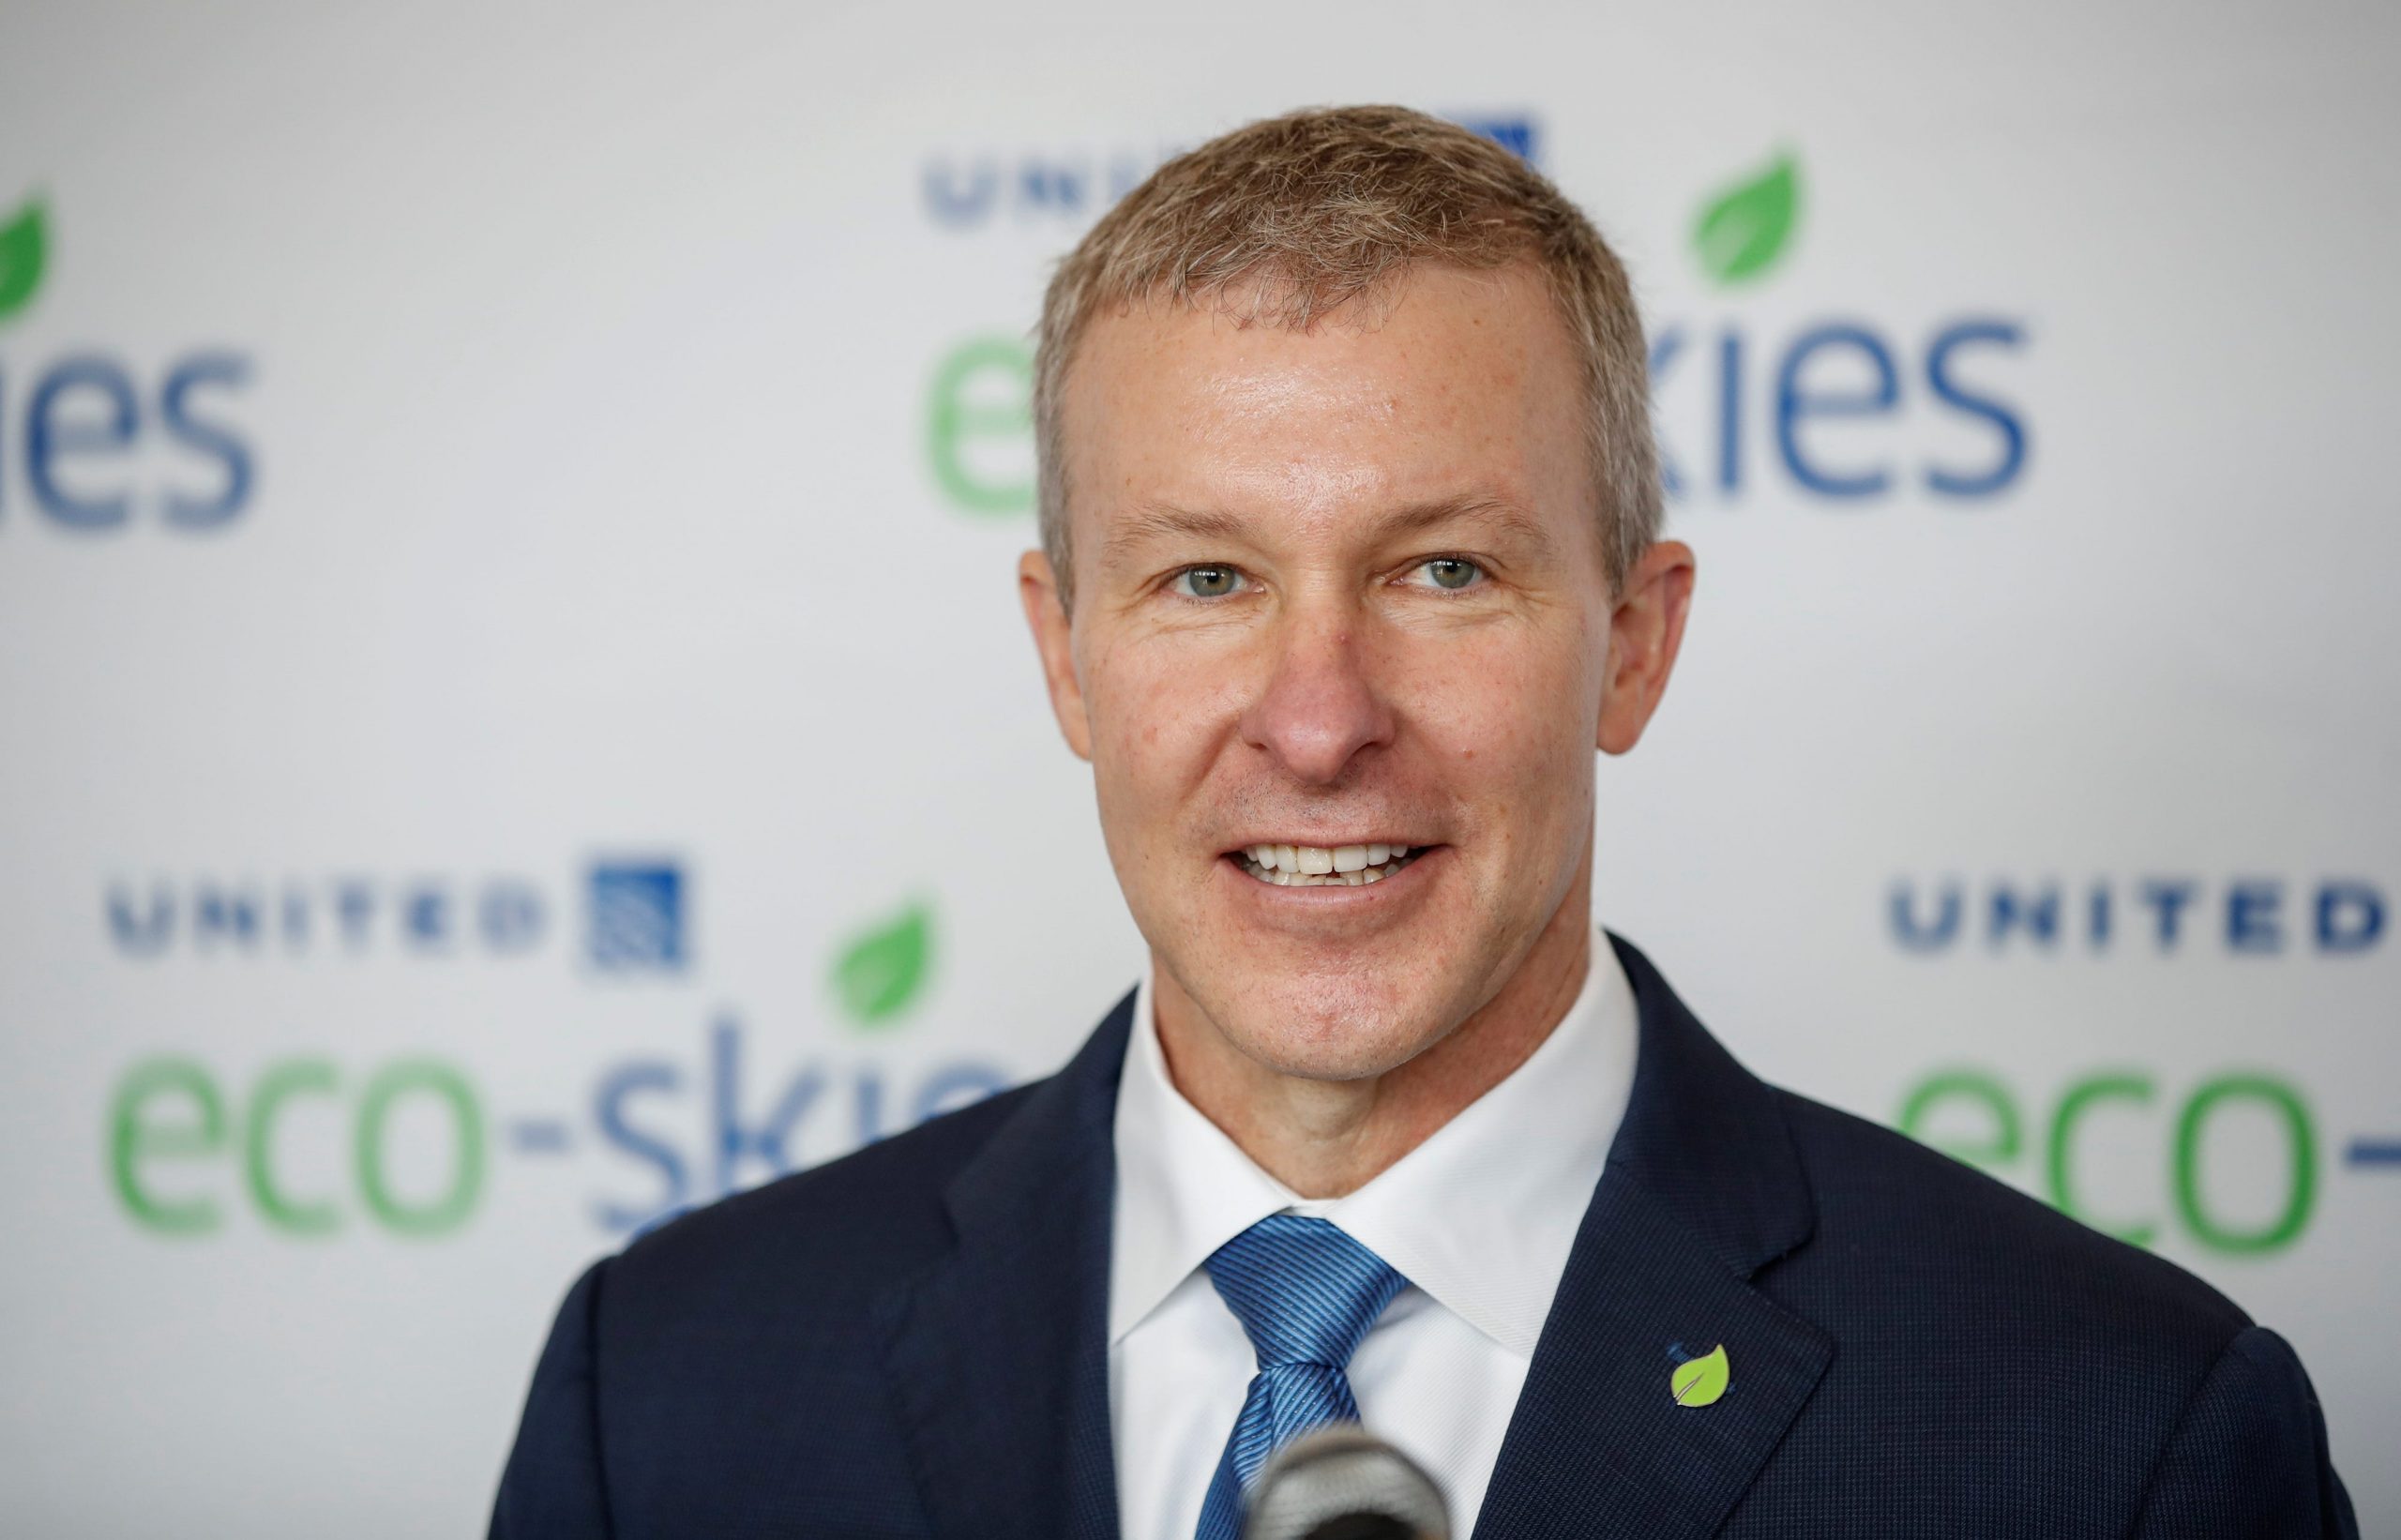 FILE PHOTO: United Airlines president Scott Kirby speaks before the departure of the "Flight for the Planet", the most eco-friendly commercial flight in history of aviation, according to the airline, from O'Hare International Airport to Los Angeles, in Chicago, Illinois, U.S., June 5, 2019. REUTERS/Kamil Krzaczynski